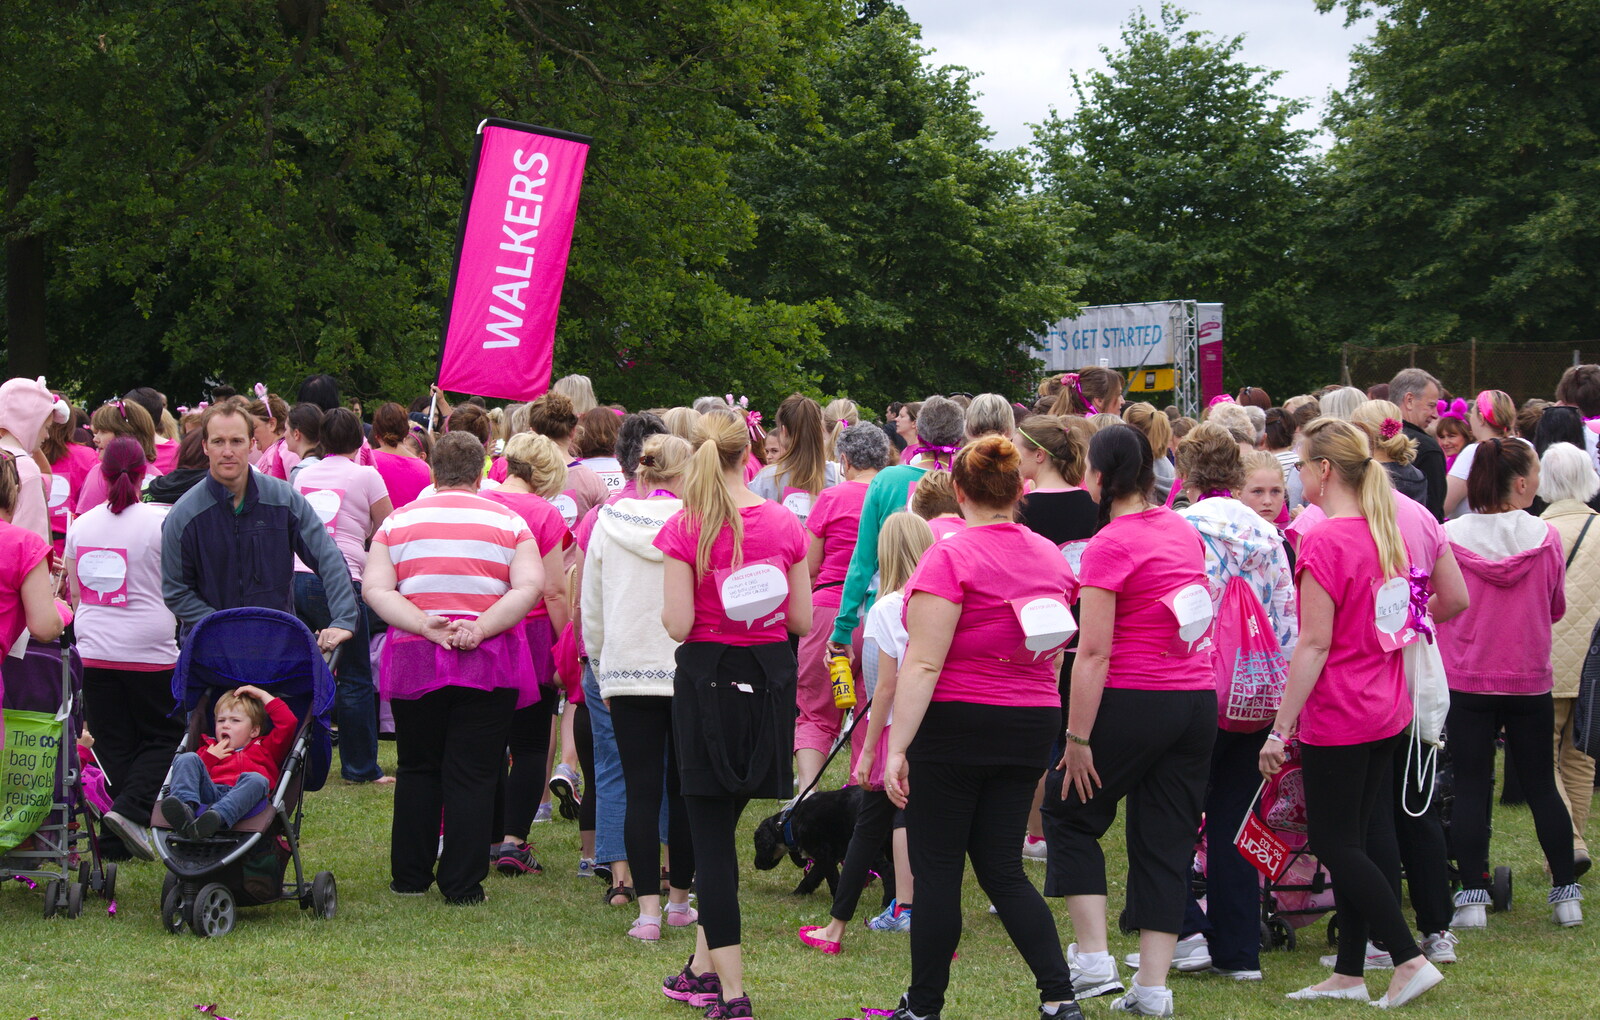 The walkers head off from Isobel's Race For Life, Chantry Park, Ipswich - 11th June 2014